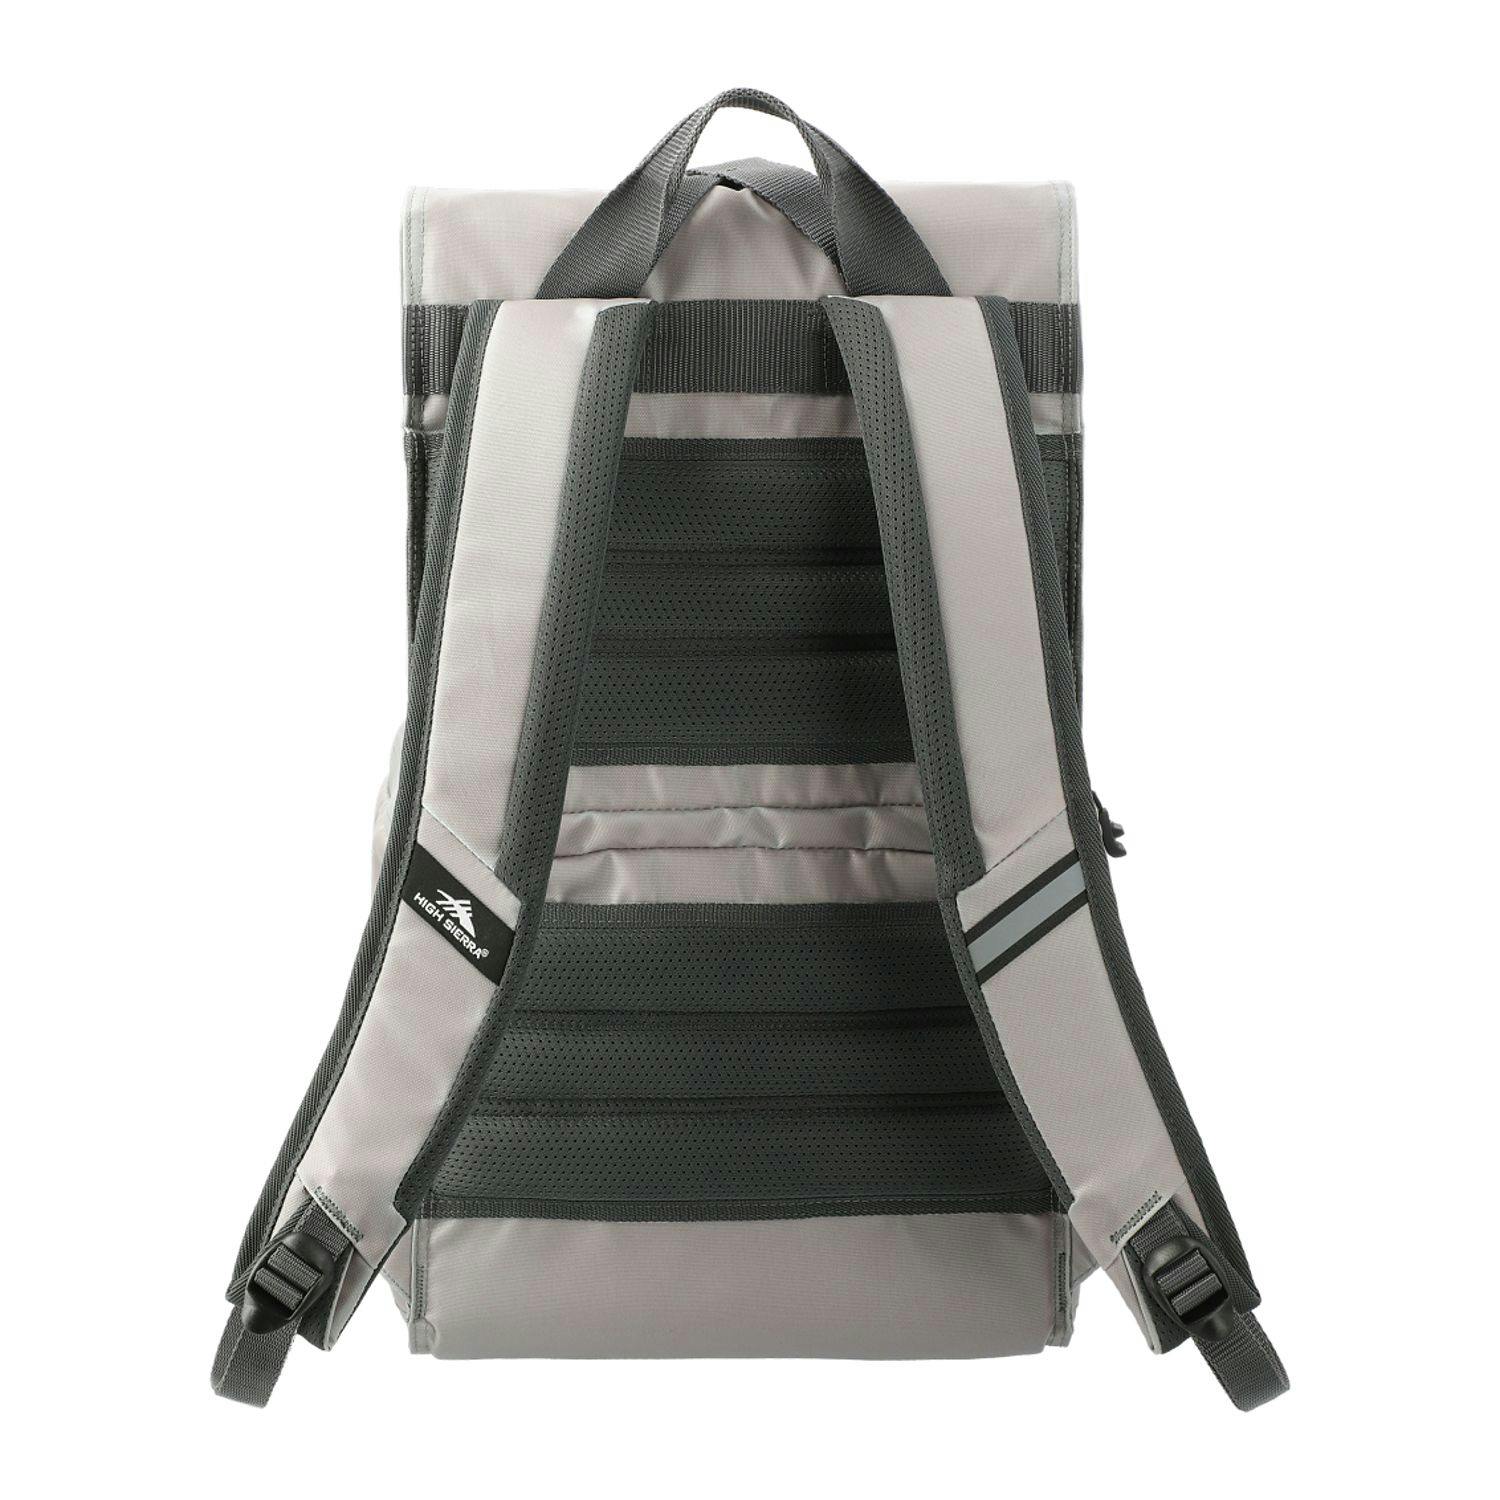 High Sierra 12 Can Backpack Cooler - additional Image 1